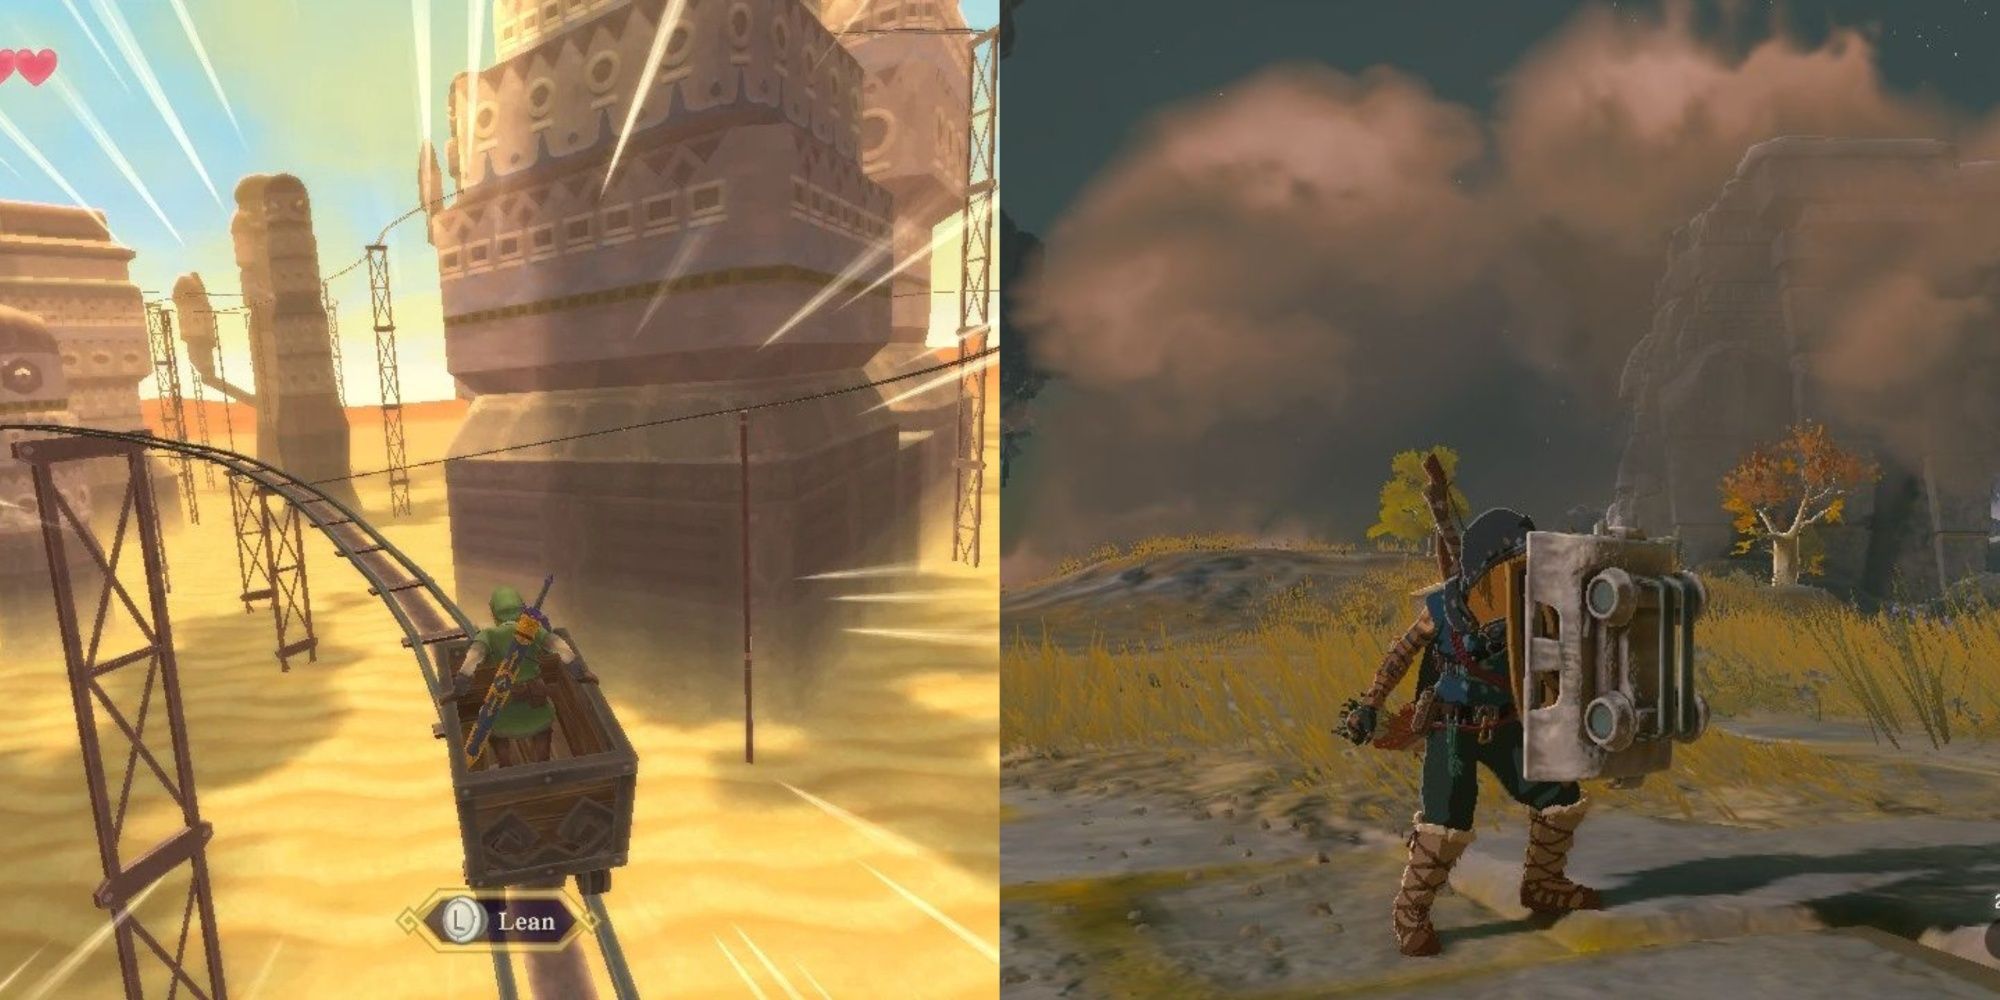 Link with a minecart in SKyward Sword and Tears of the Kingdom